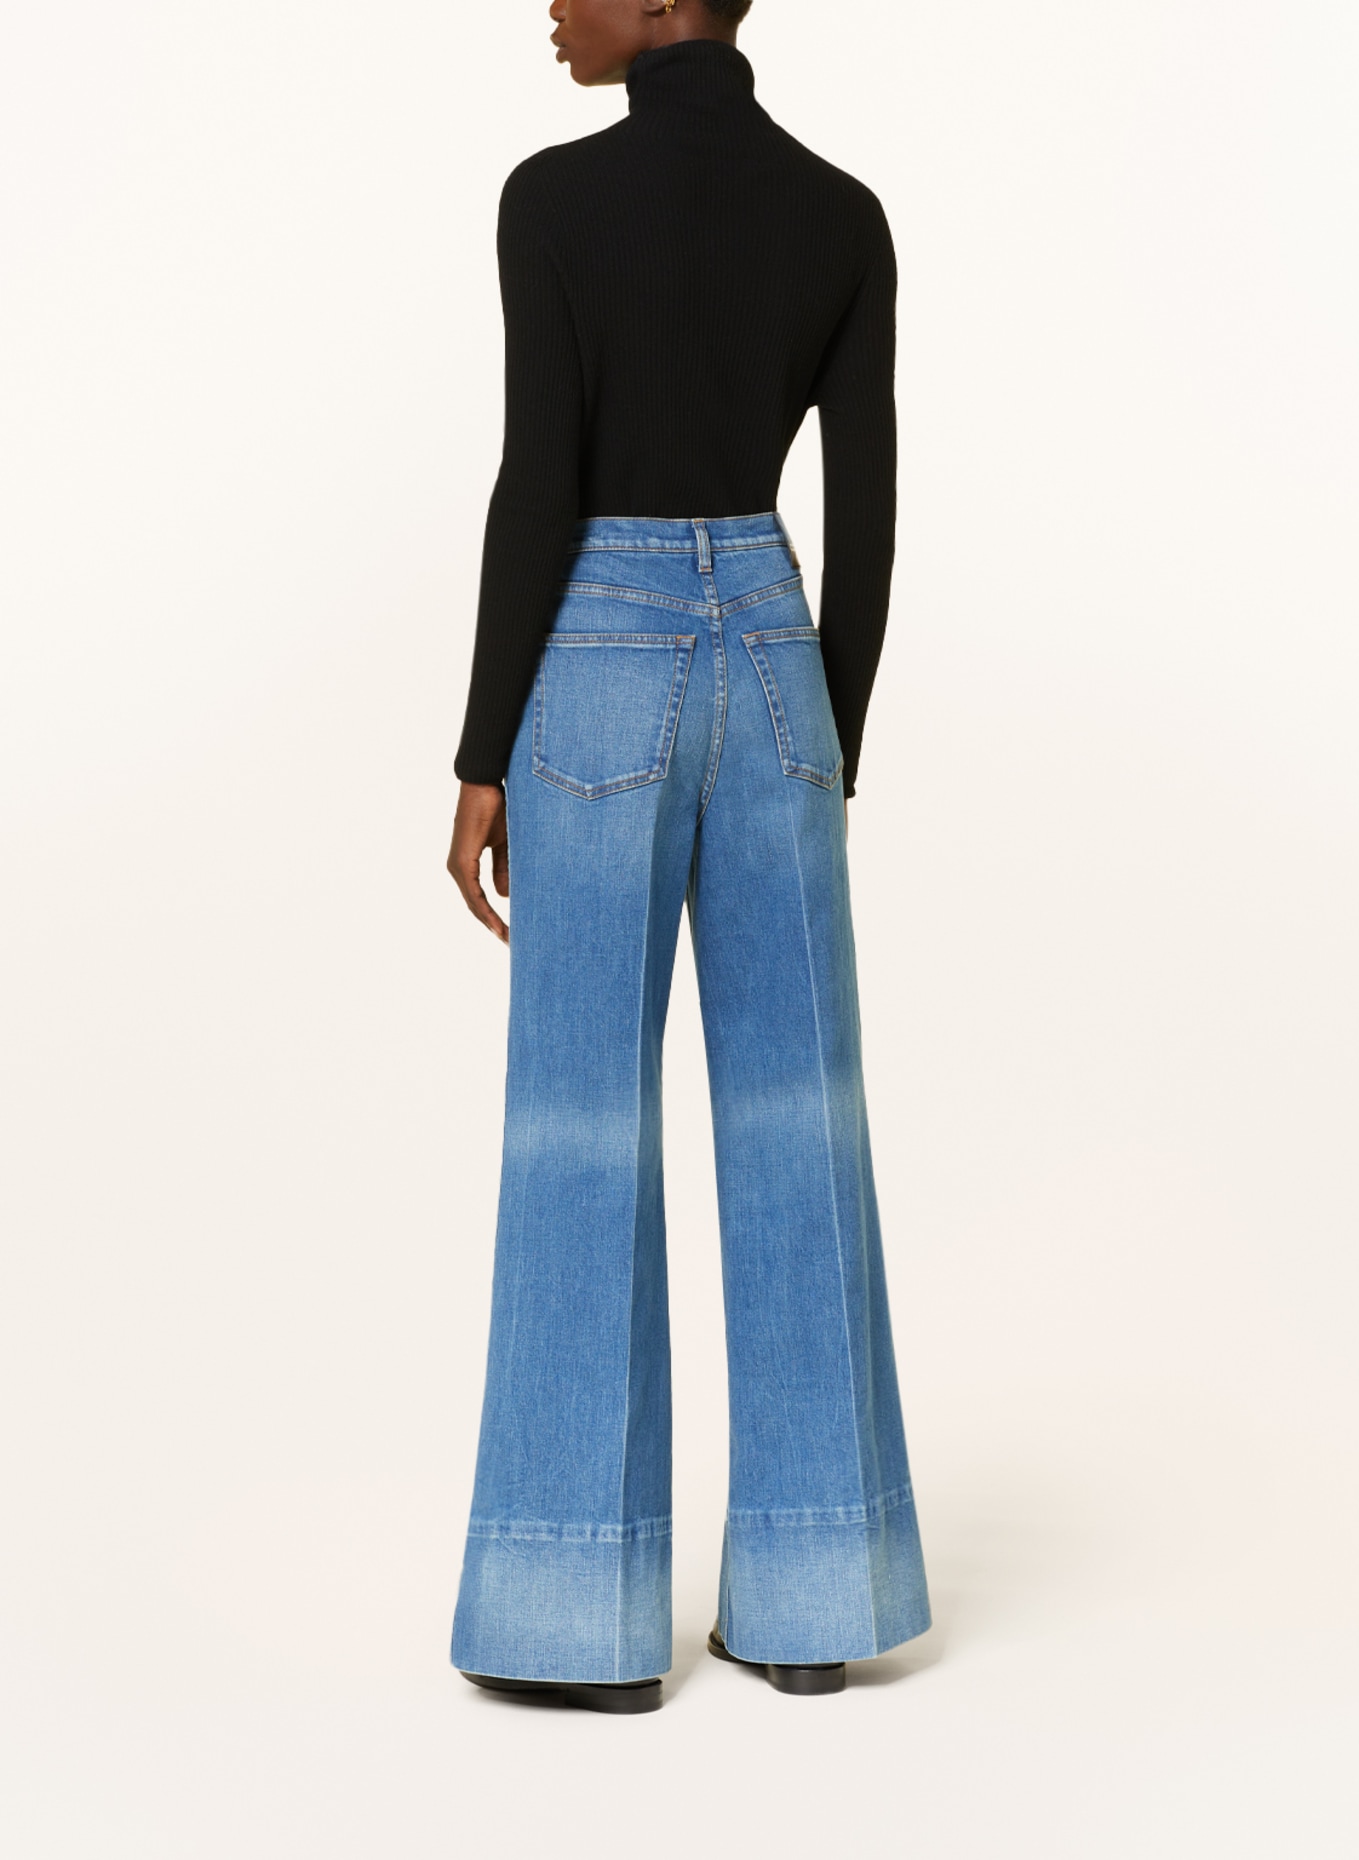 GUCCI Flared jeans, Color: 4759 DARK BLUE/MIX (Image 3)